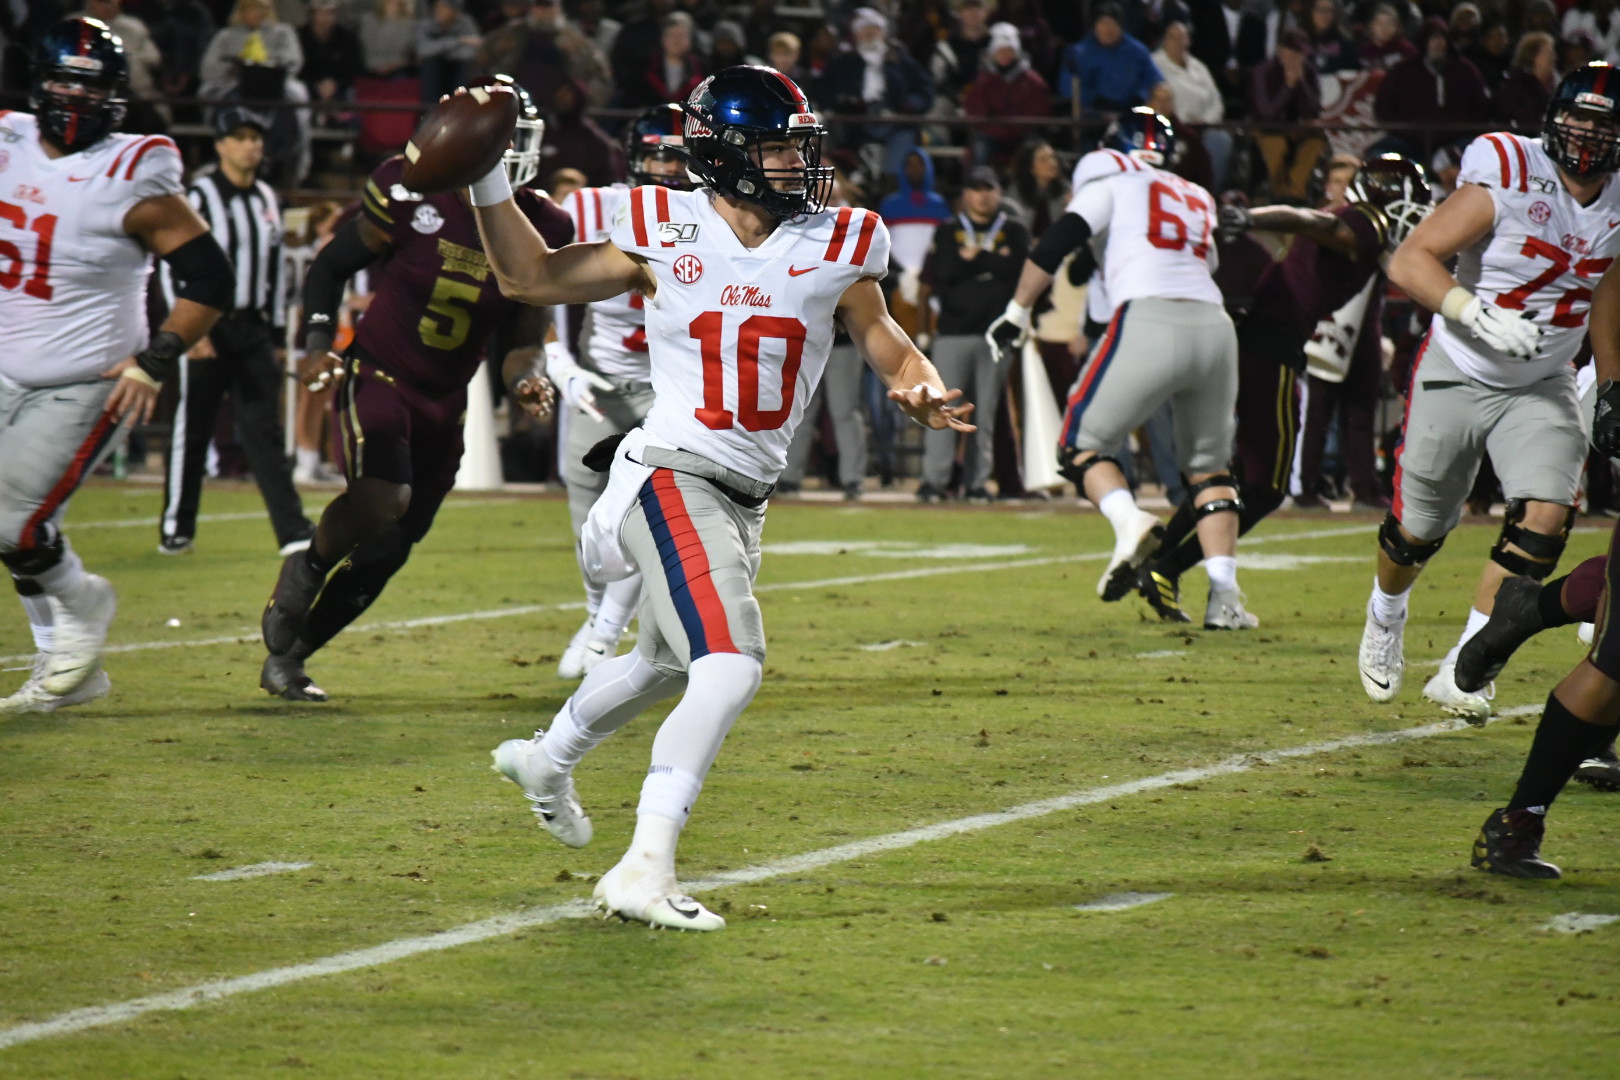 The Good, The Bad, and The Ugly for Ole Miss in the Egg Bowl